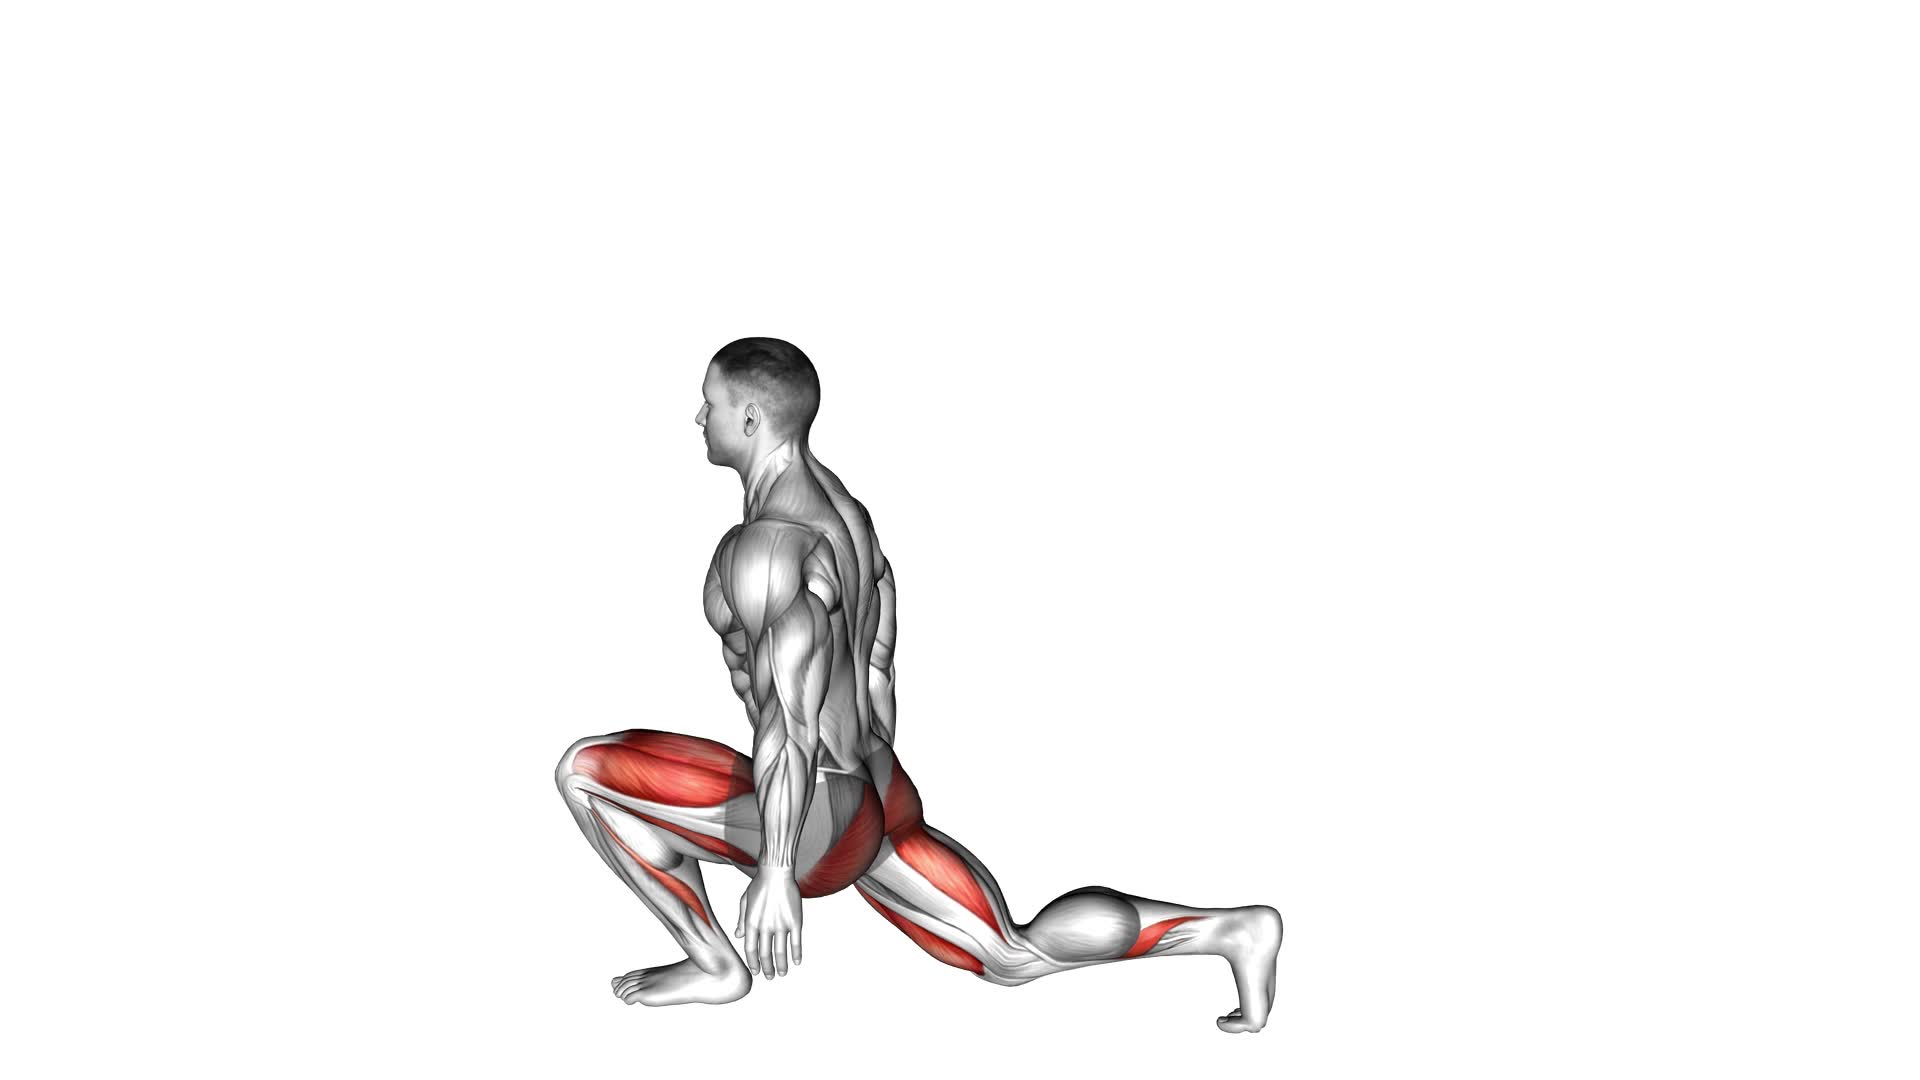 Bodyweight Low Split Squat (male) - Video Exercise Guide & Tips